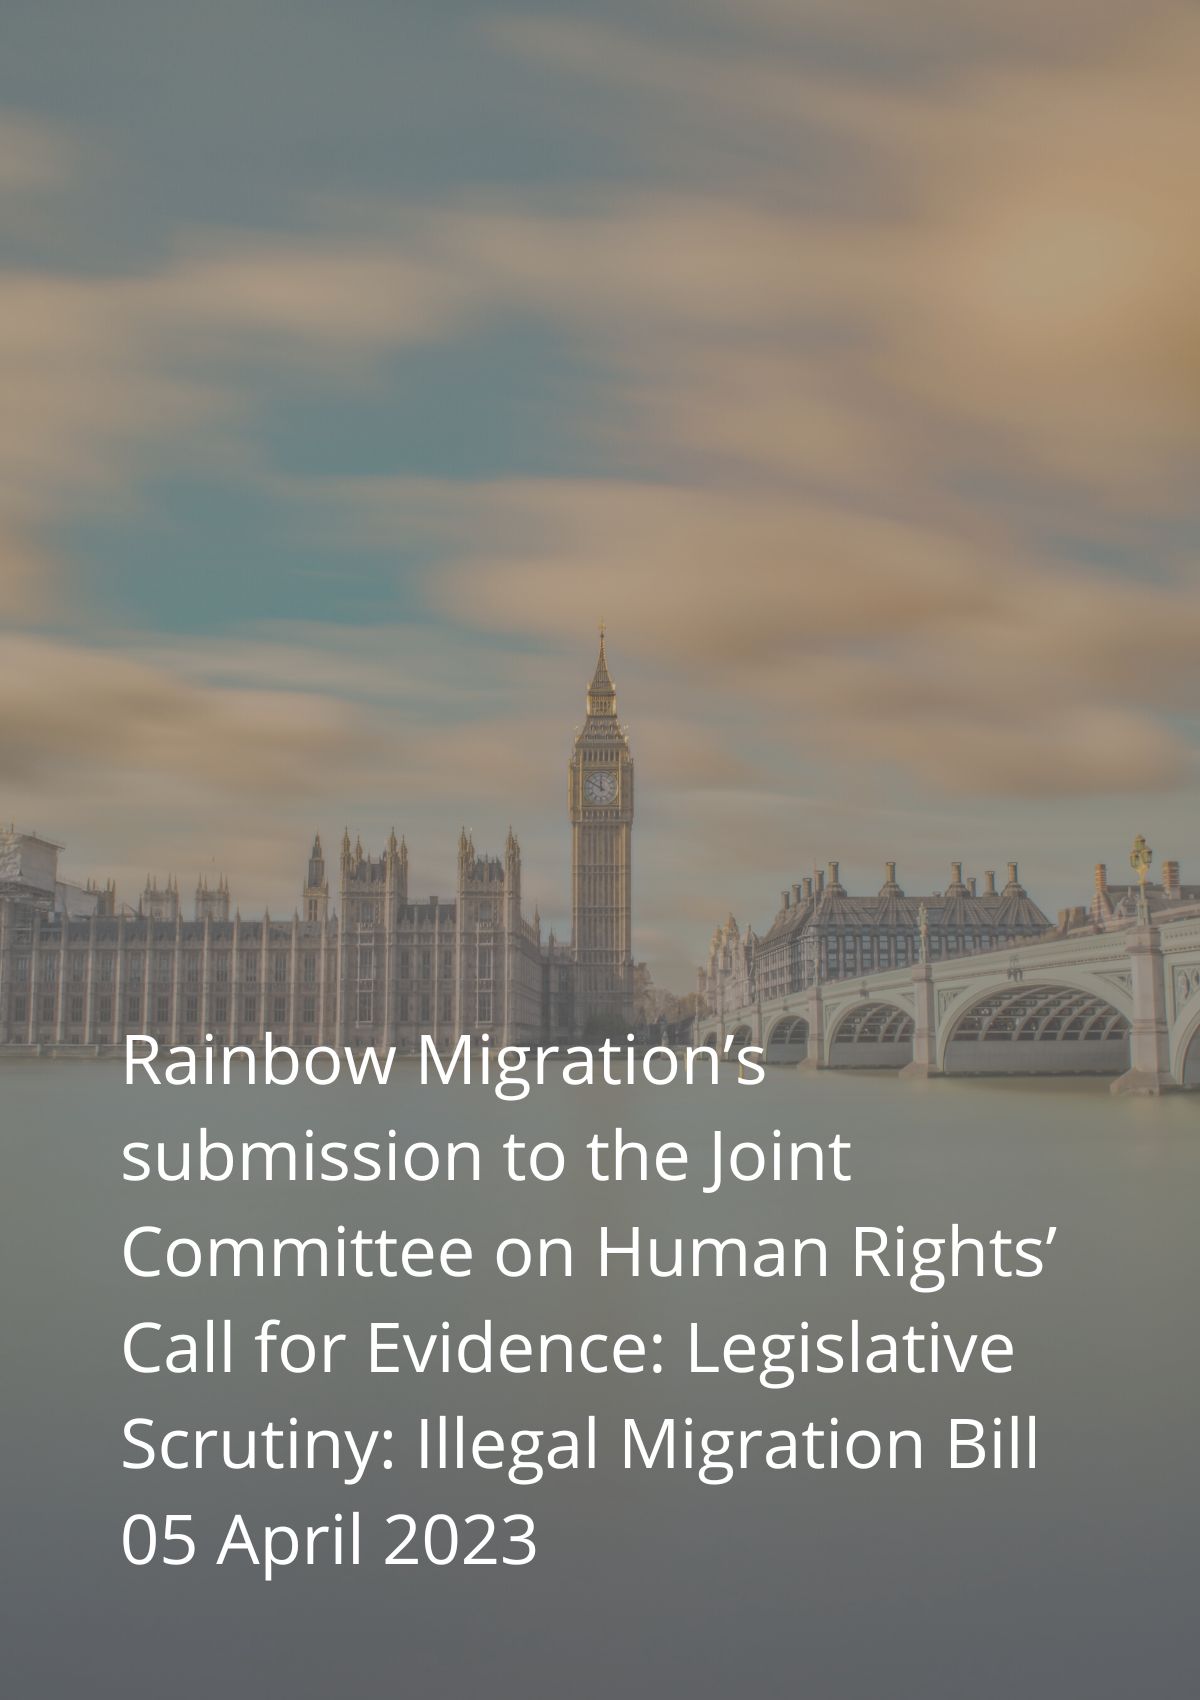 Rainbow migration's submission to the joint rights committee on human rights.